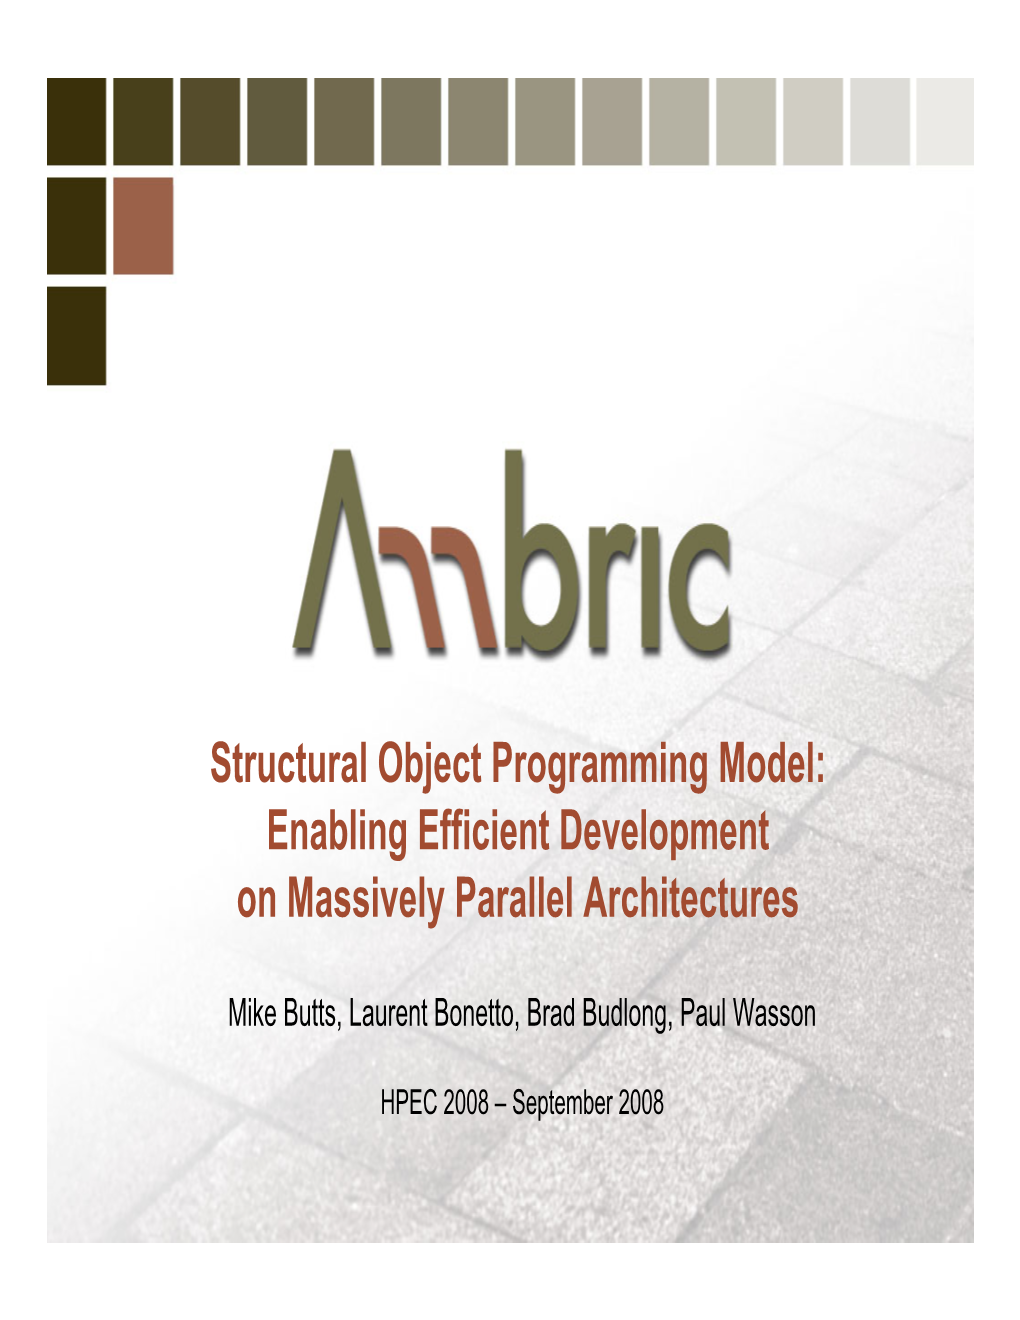 Structural Object Programming Model: Enabling Efficient Development on Massively Parallel Architectures